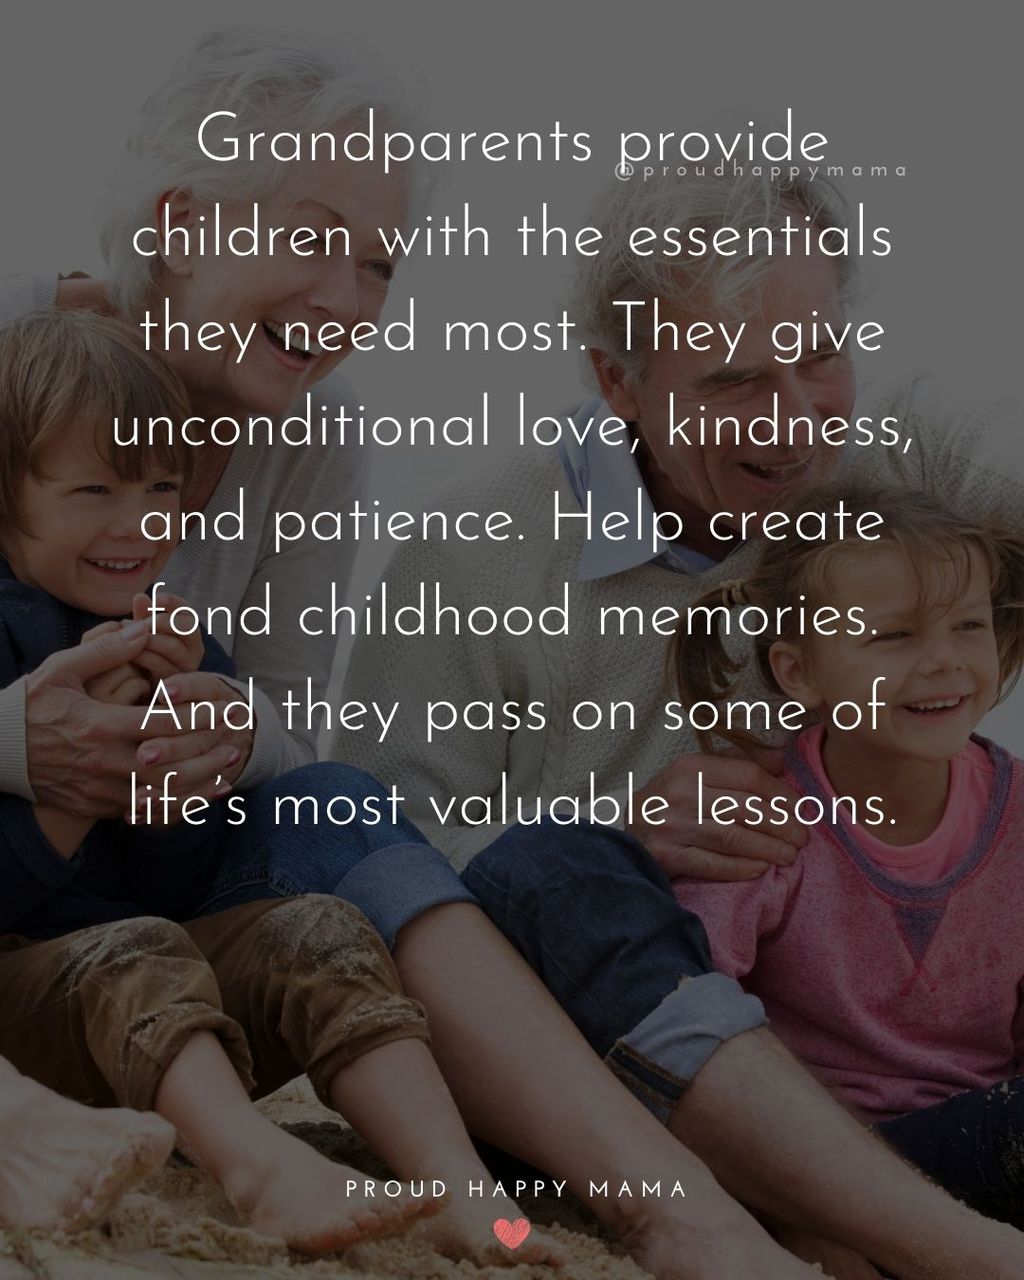 Quotes On Grandparenting | Grandparents provide children with the essentials they need most. They give unconditional love, kindness, and patience. Help create fond childhood memories. And they pass on some of life’s most valuable lessons.